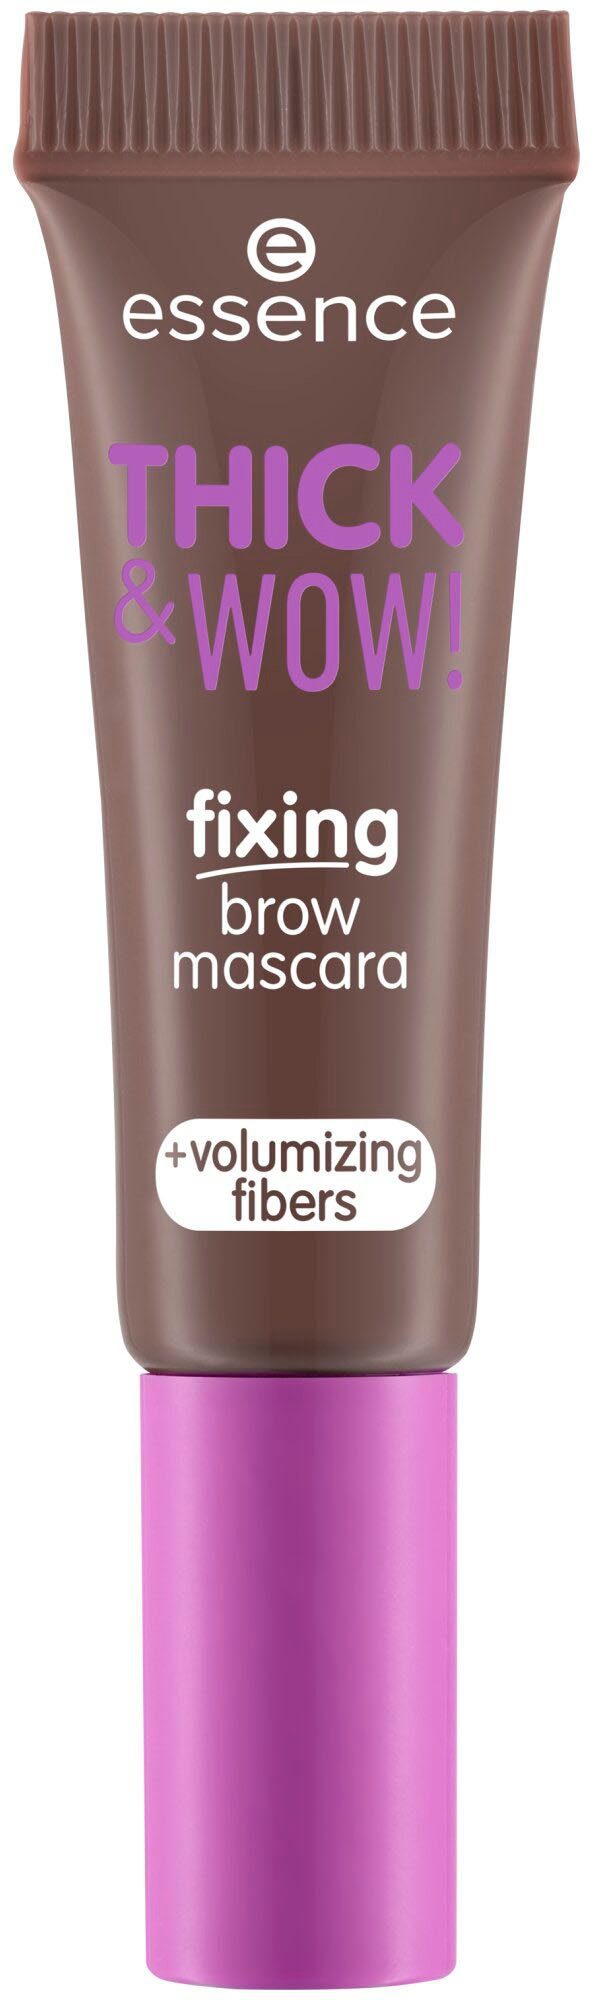 mascara, & 3-tlg. THICK Augenbrauen-Gel Brown Essence fixing WOW! brow Ash